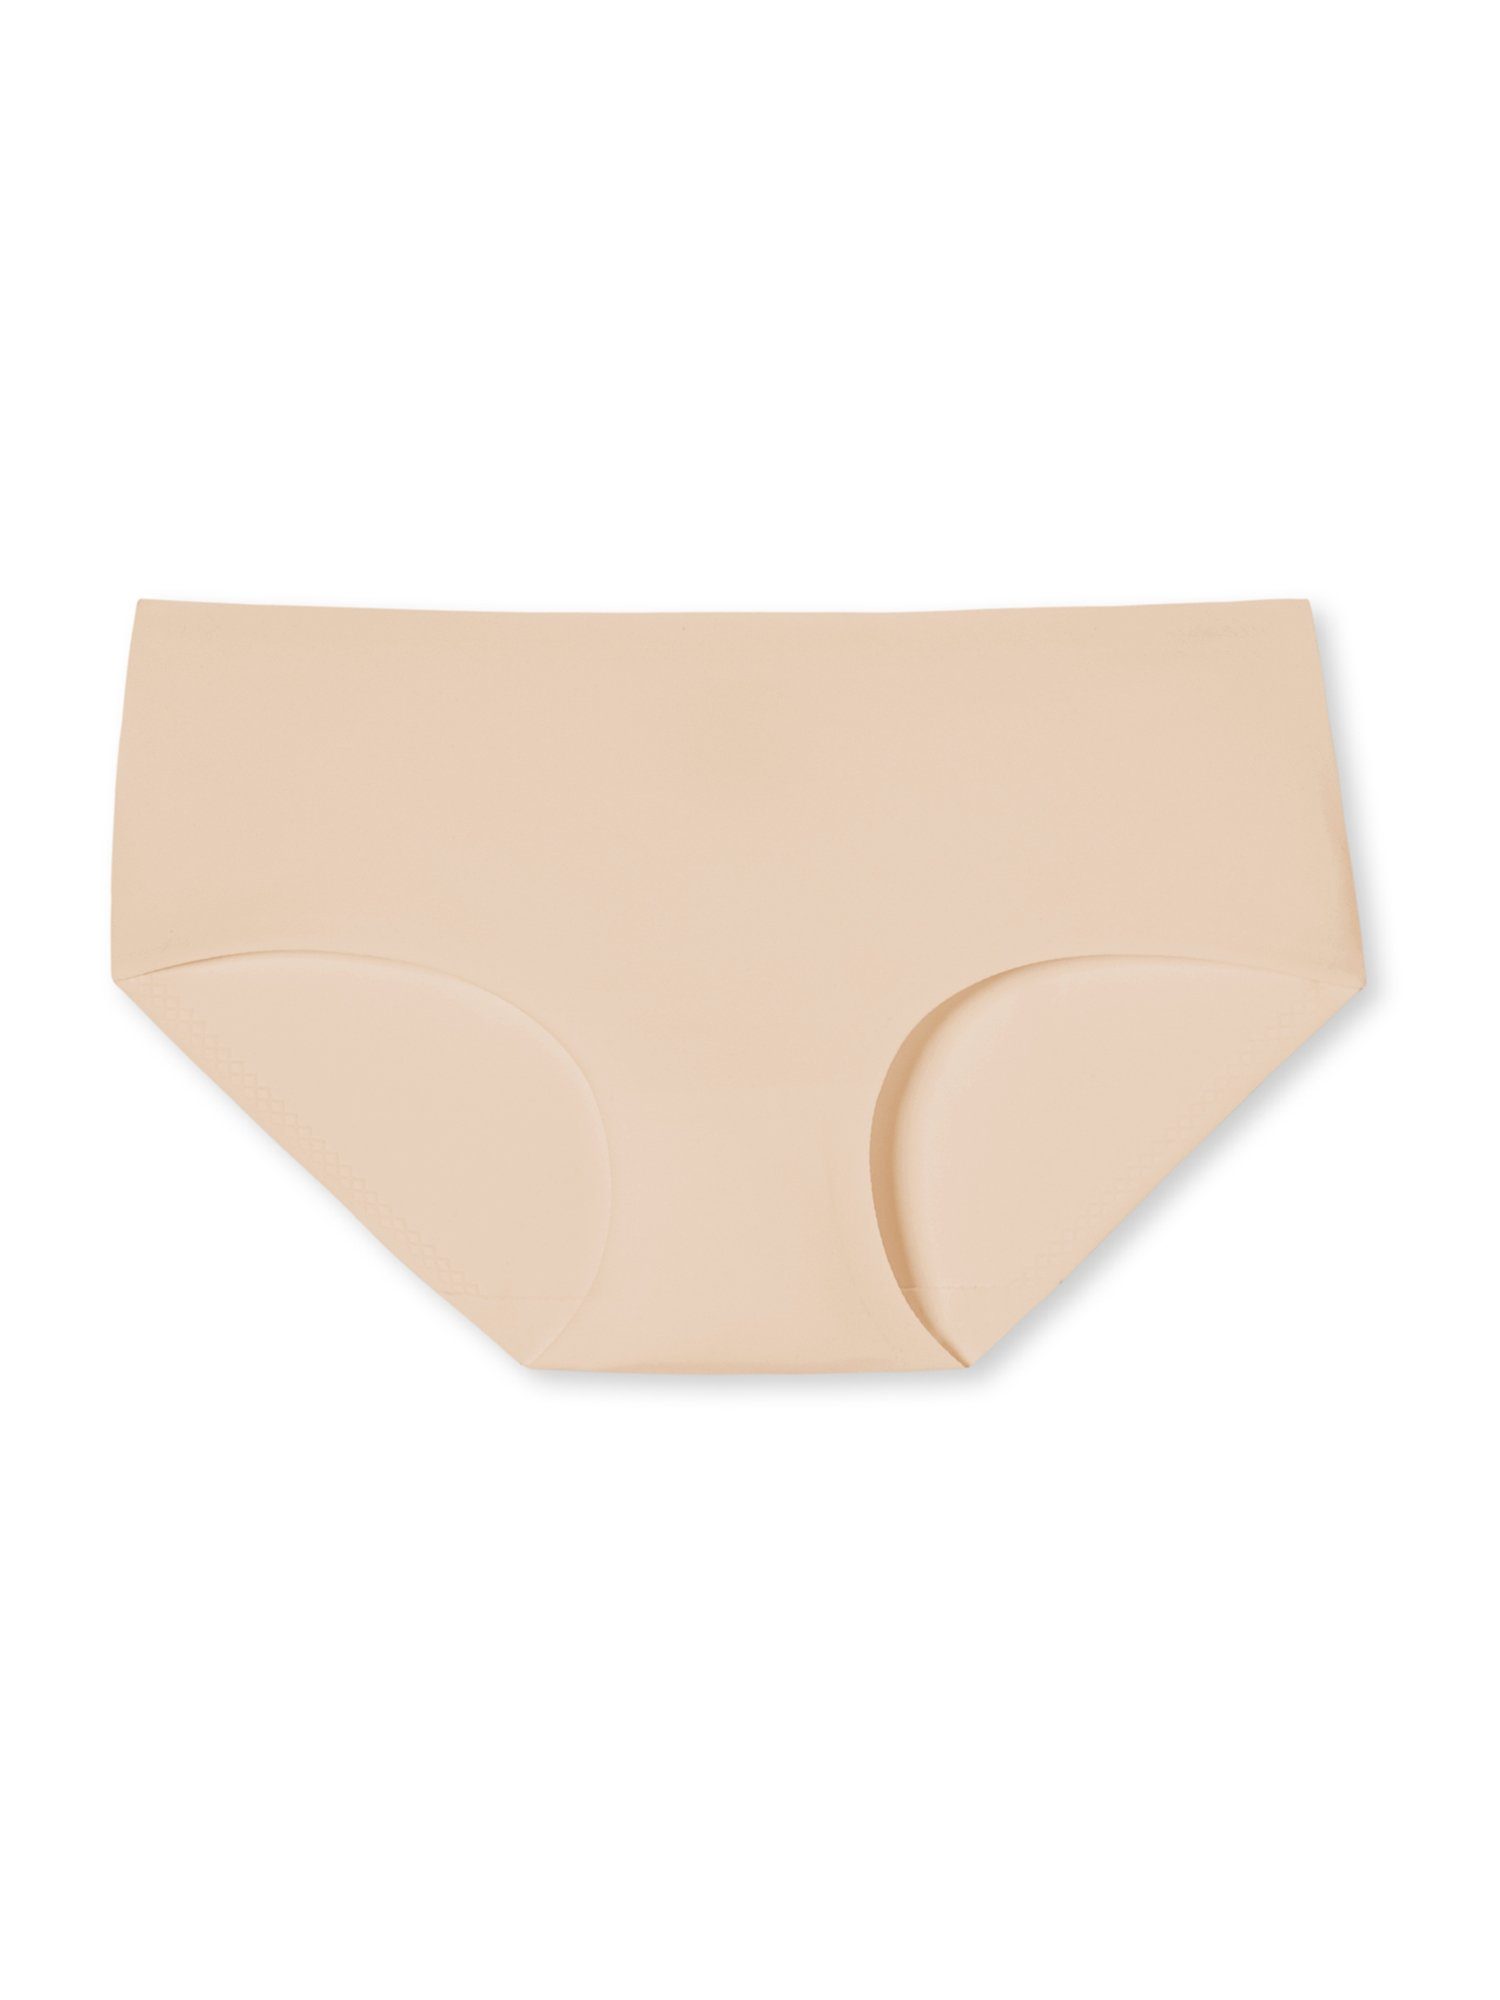 Schiesser Panty Invisible Soft sand